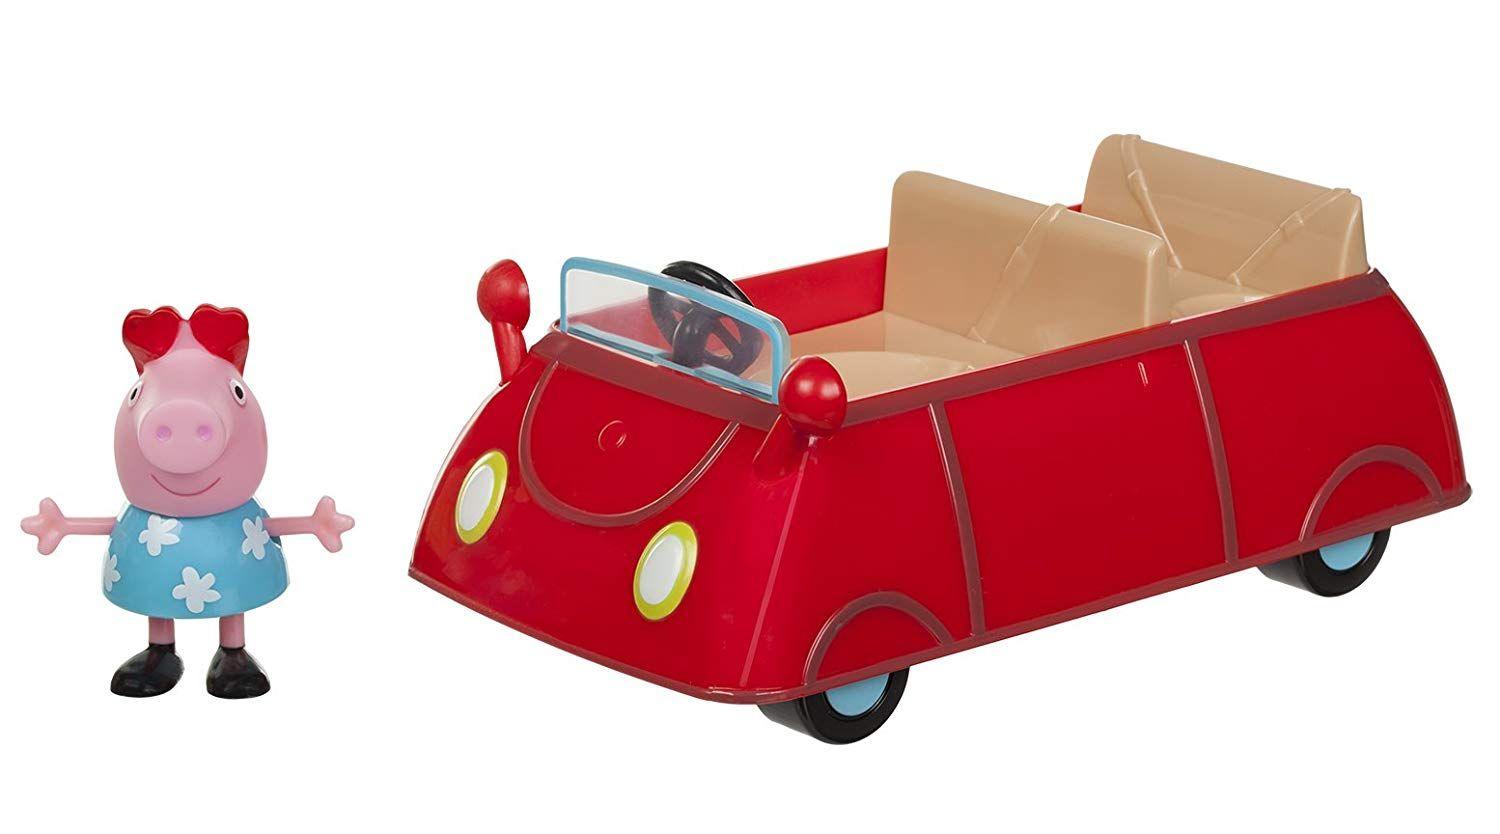 Little Red Car Logo - Amazon.com: Peppa Pig Little Red Car: Toys & Games